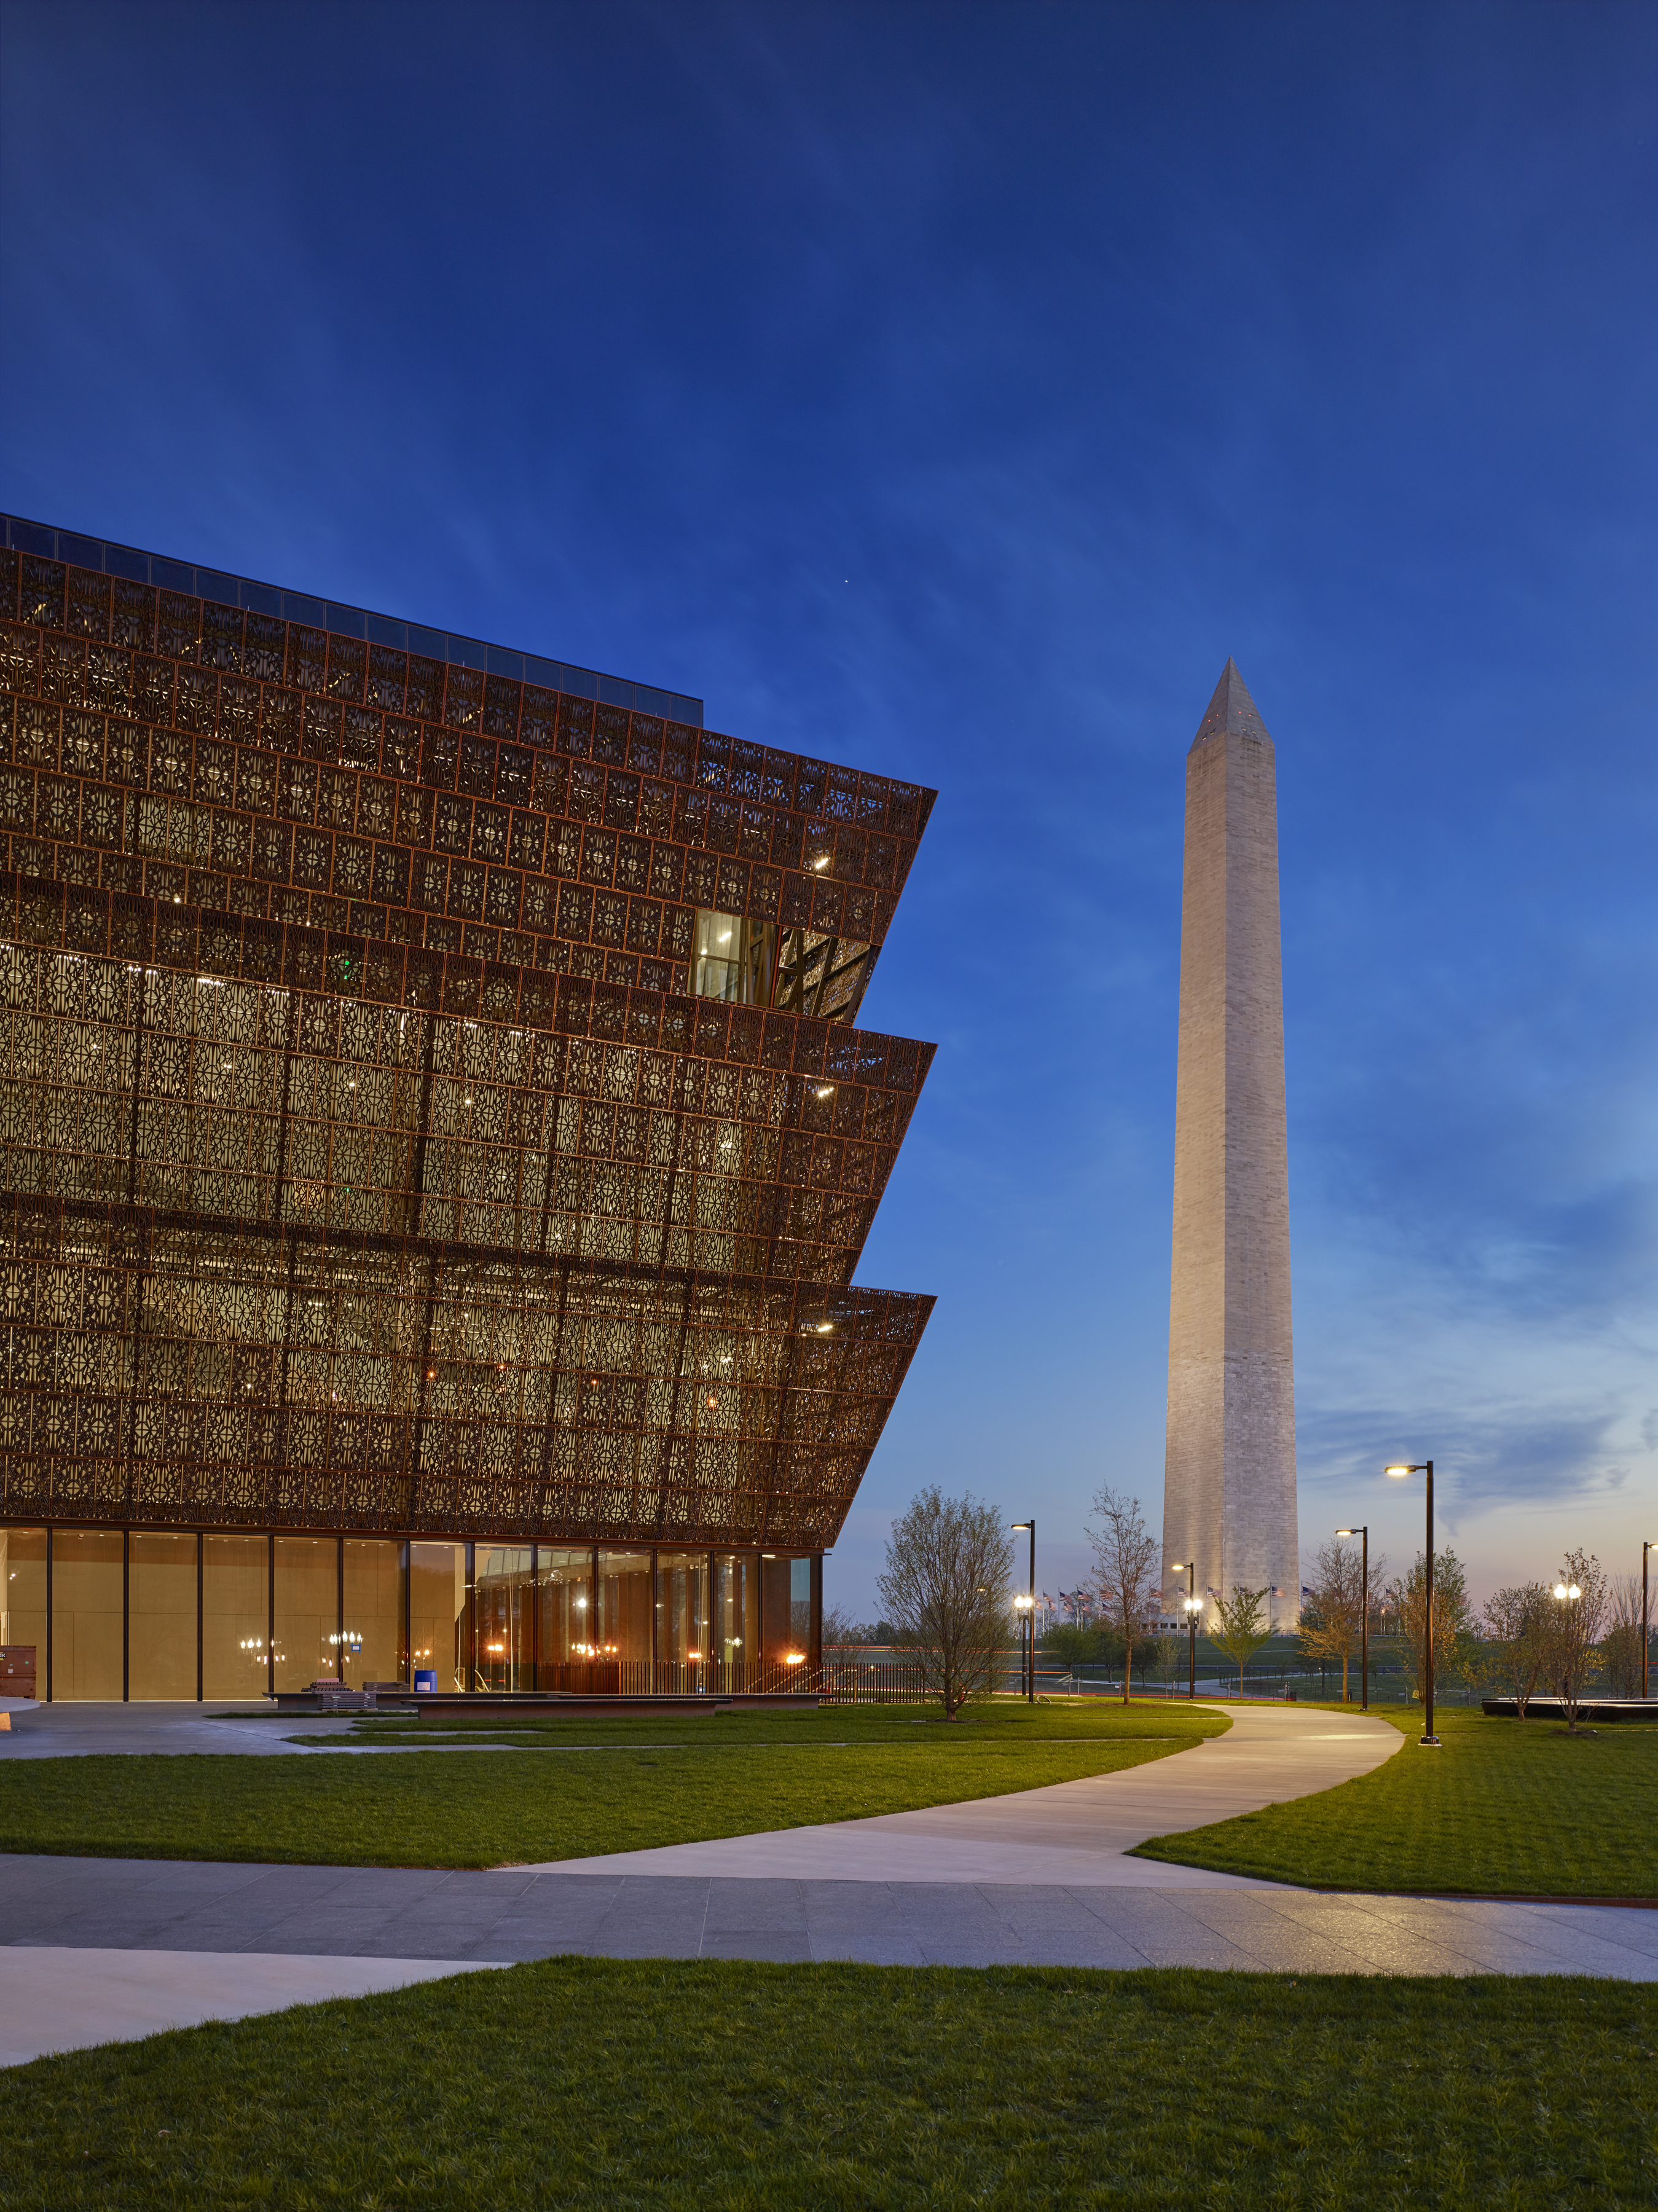 Cbs This Morning To Preview National Museum Of African American History